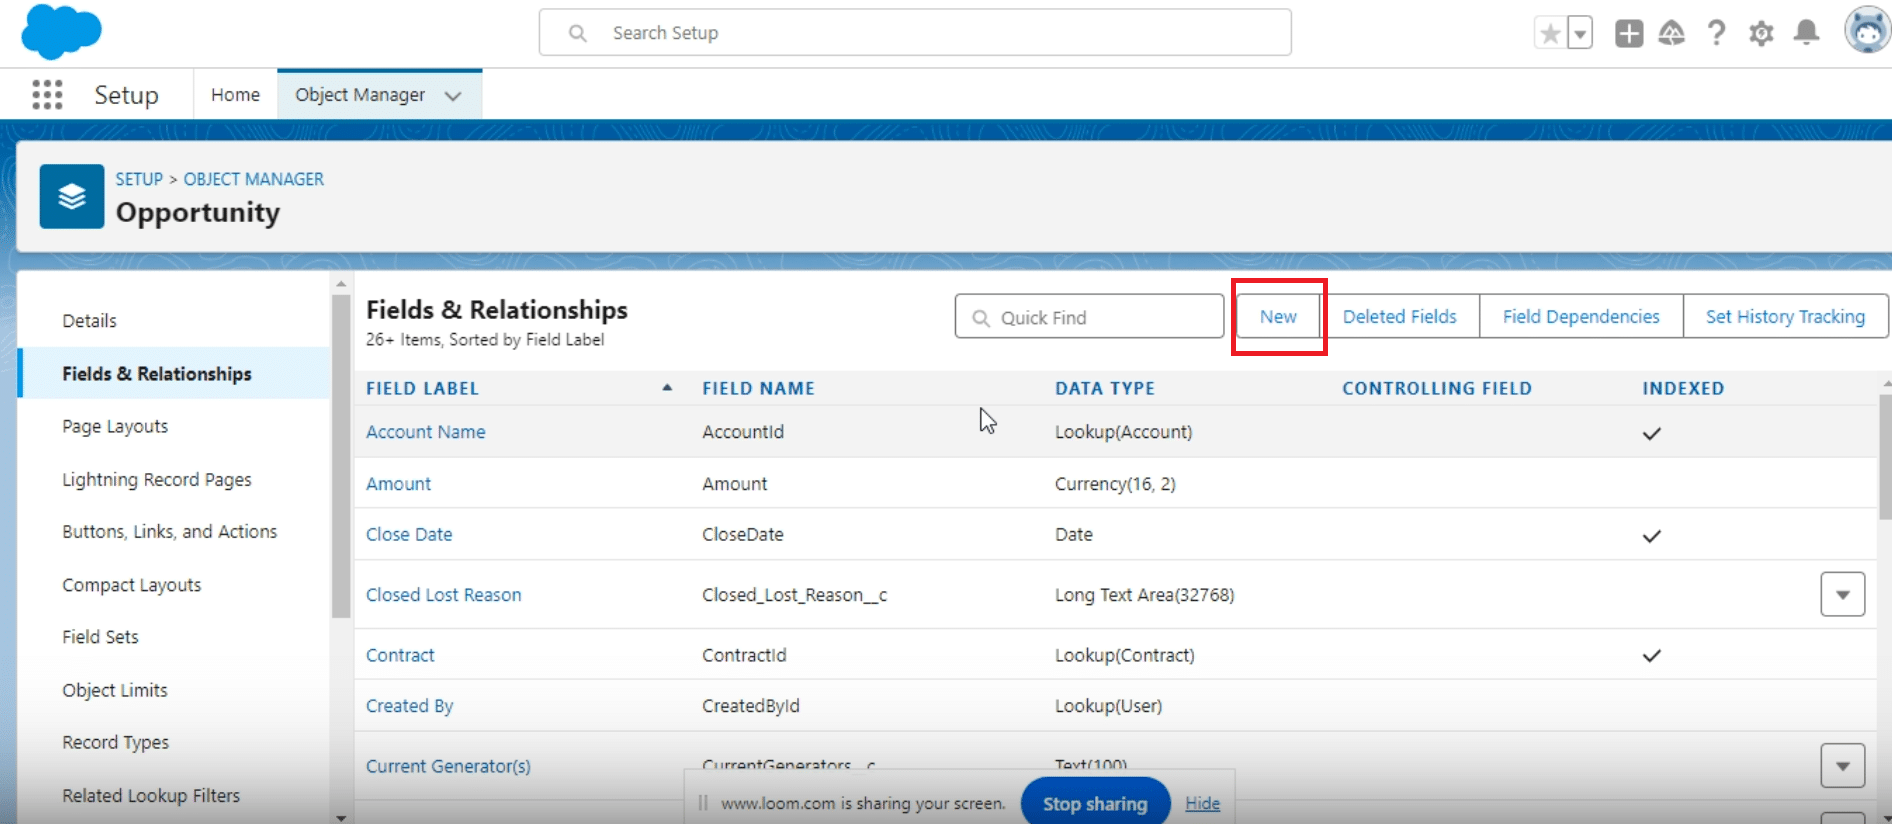 Opening the Fields & Relationships section in the Opportunity object setup